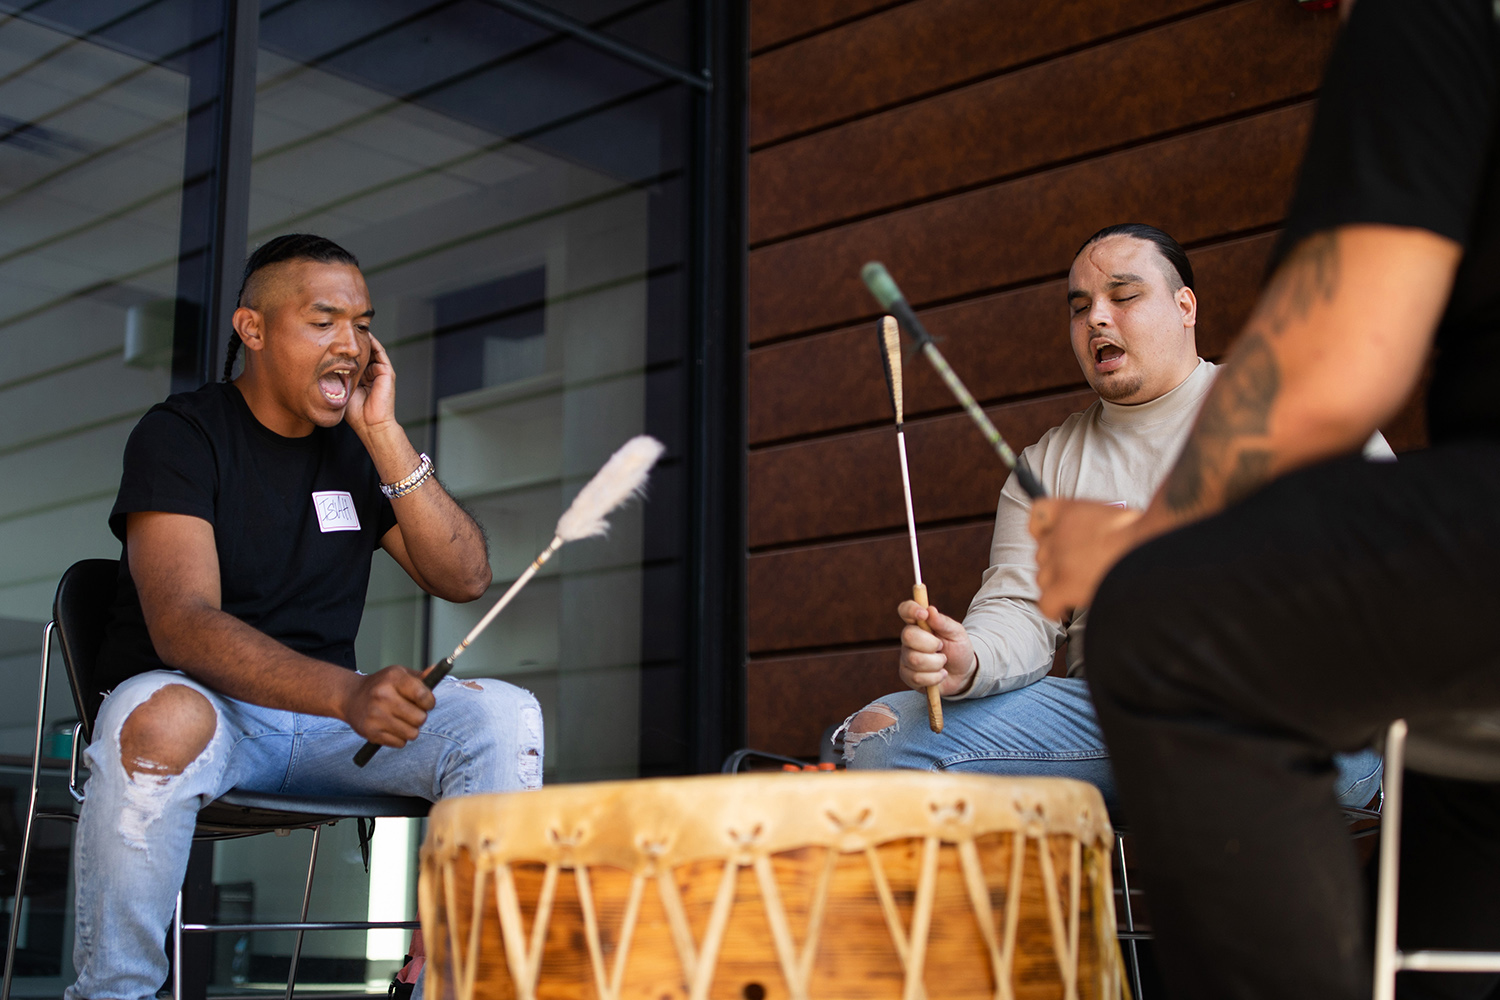 Members of the Tsaunka Sugar Drum Group seated in a circle, performing on drums and singing.